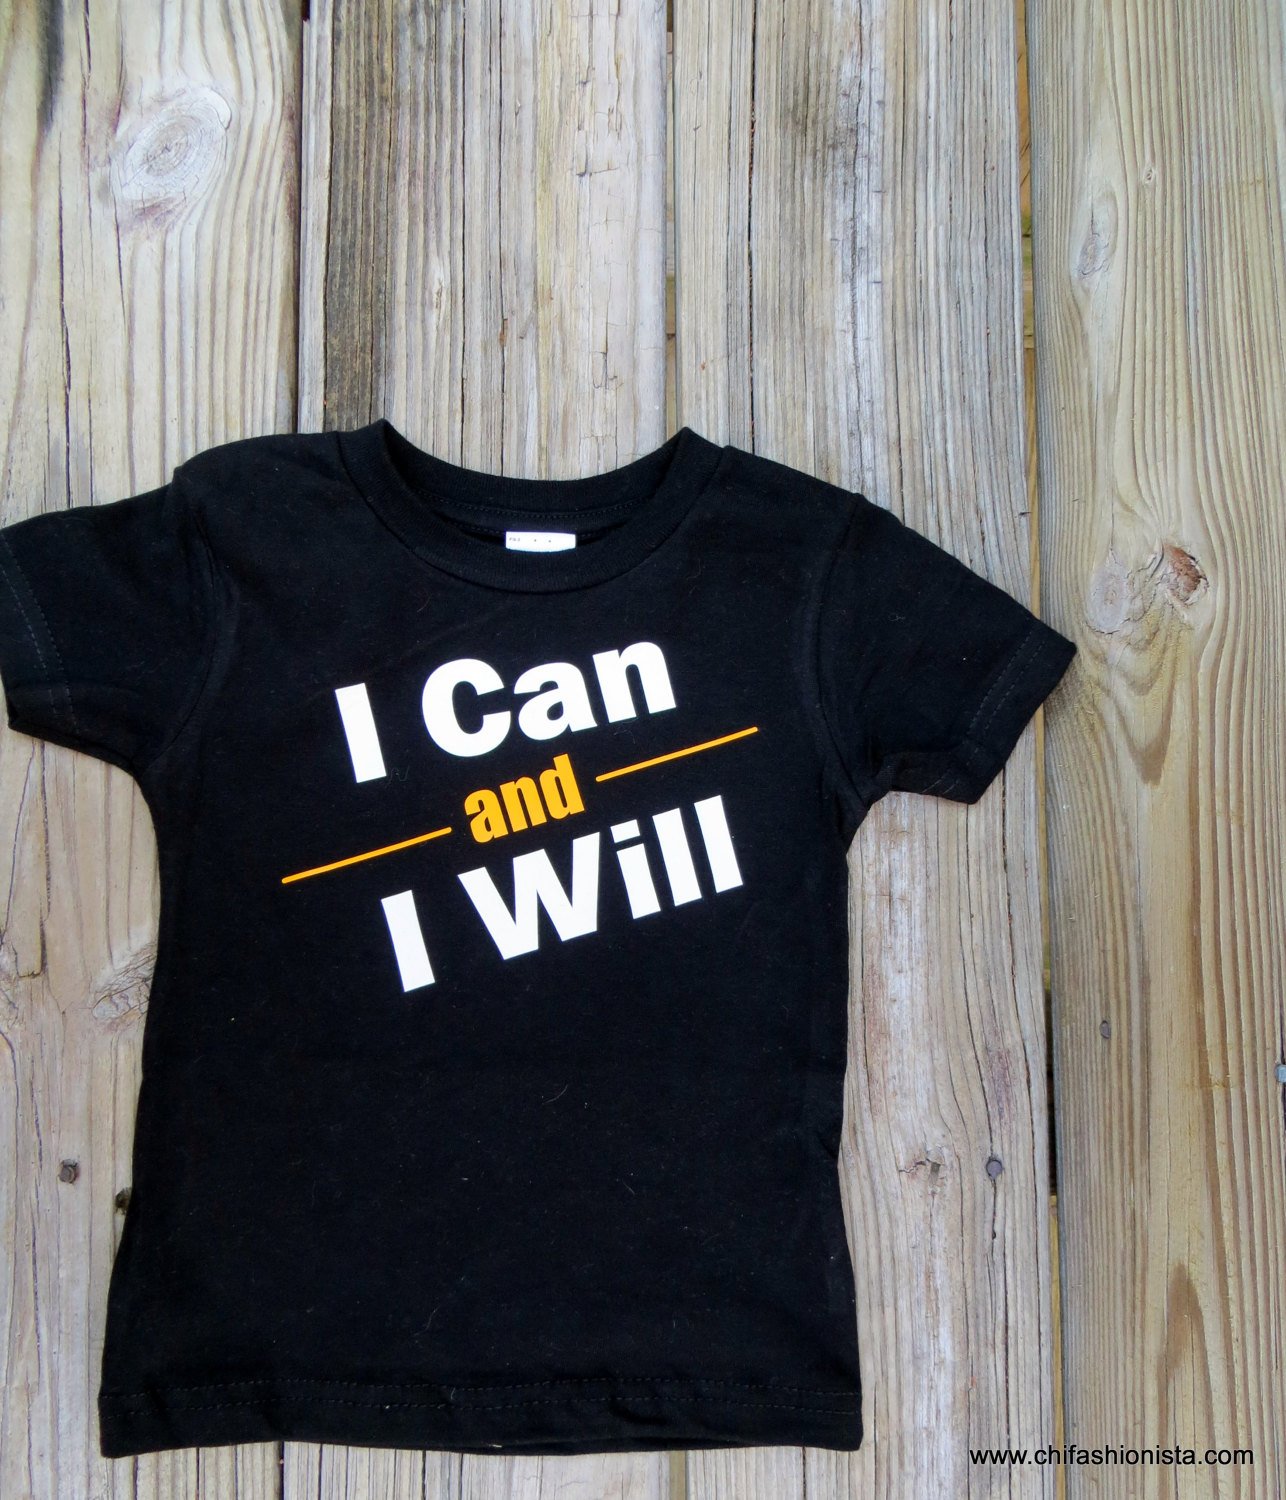 Handcrafted Children's Clothing, Clothing for Children and Parents, I Can and I Will- Spina Bifida Awareness Shirt, chi-fashionista